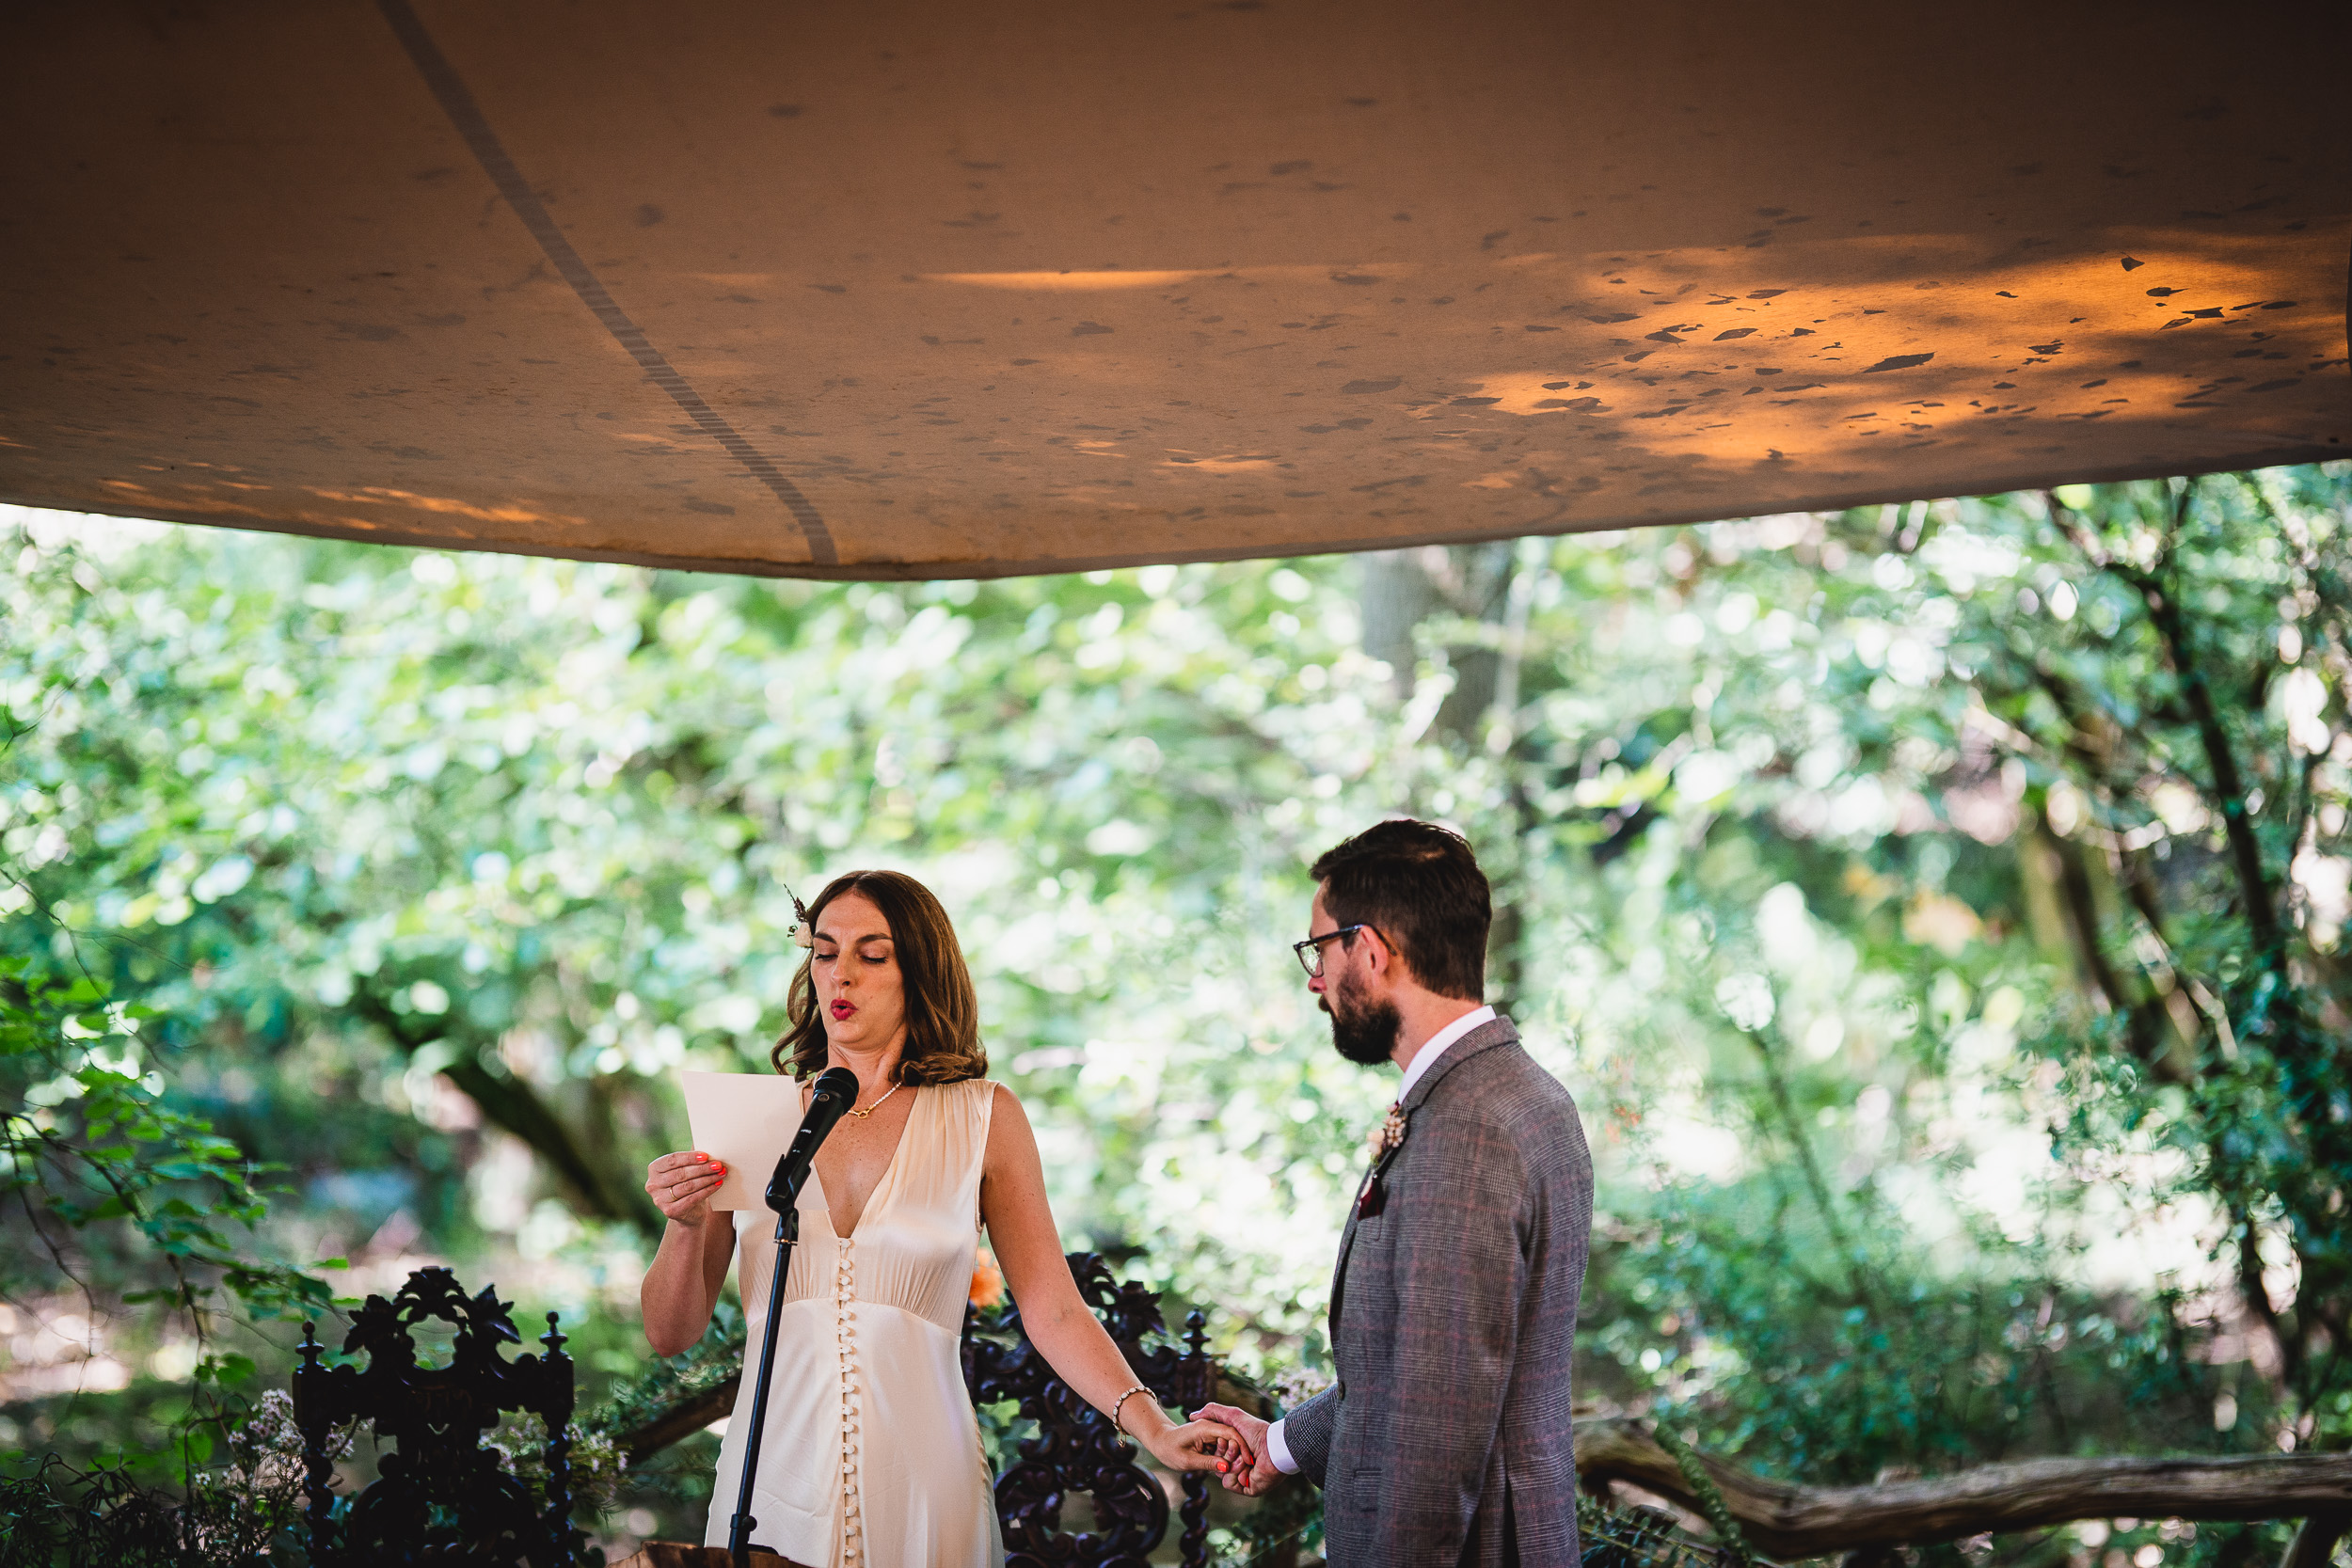 A bride and groom exchange vows under a tent in the Ridge Farm woods, Surrey Wedding.